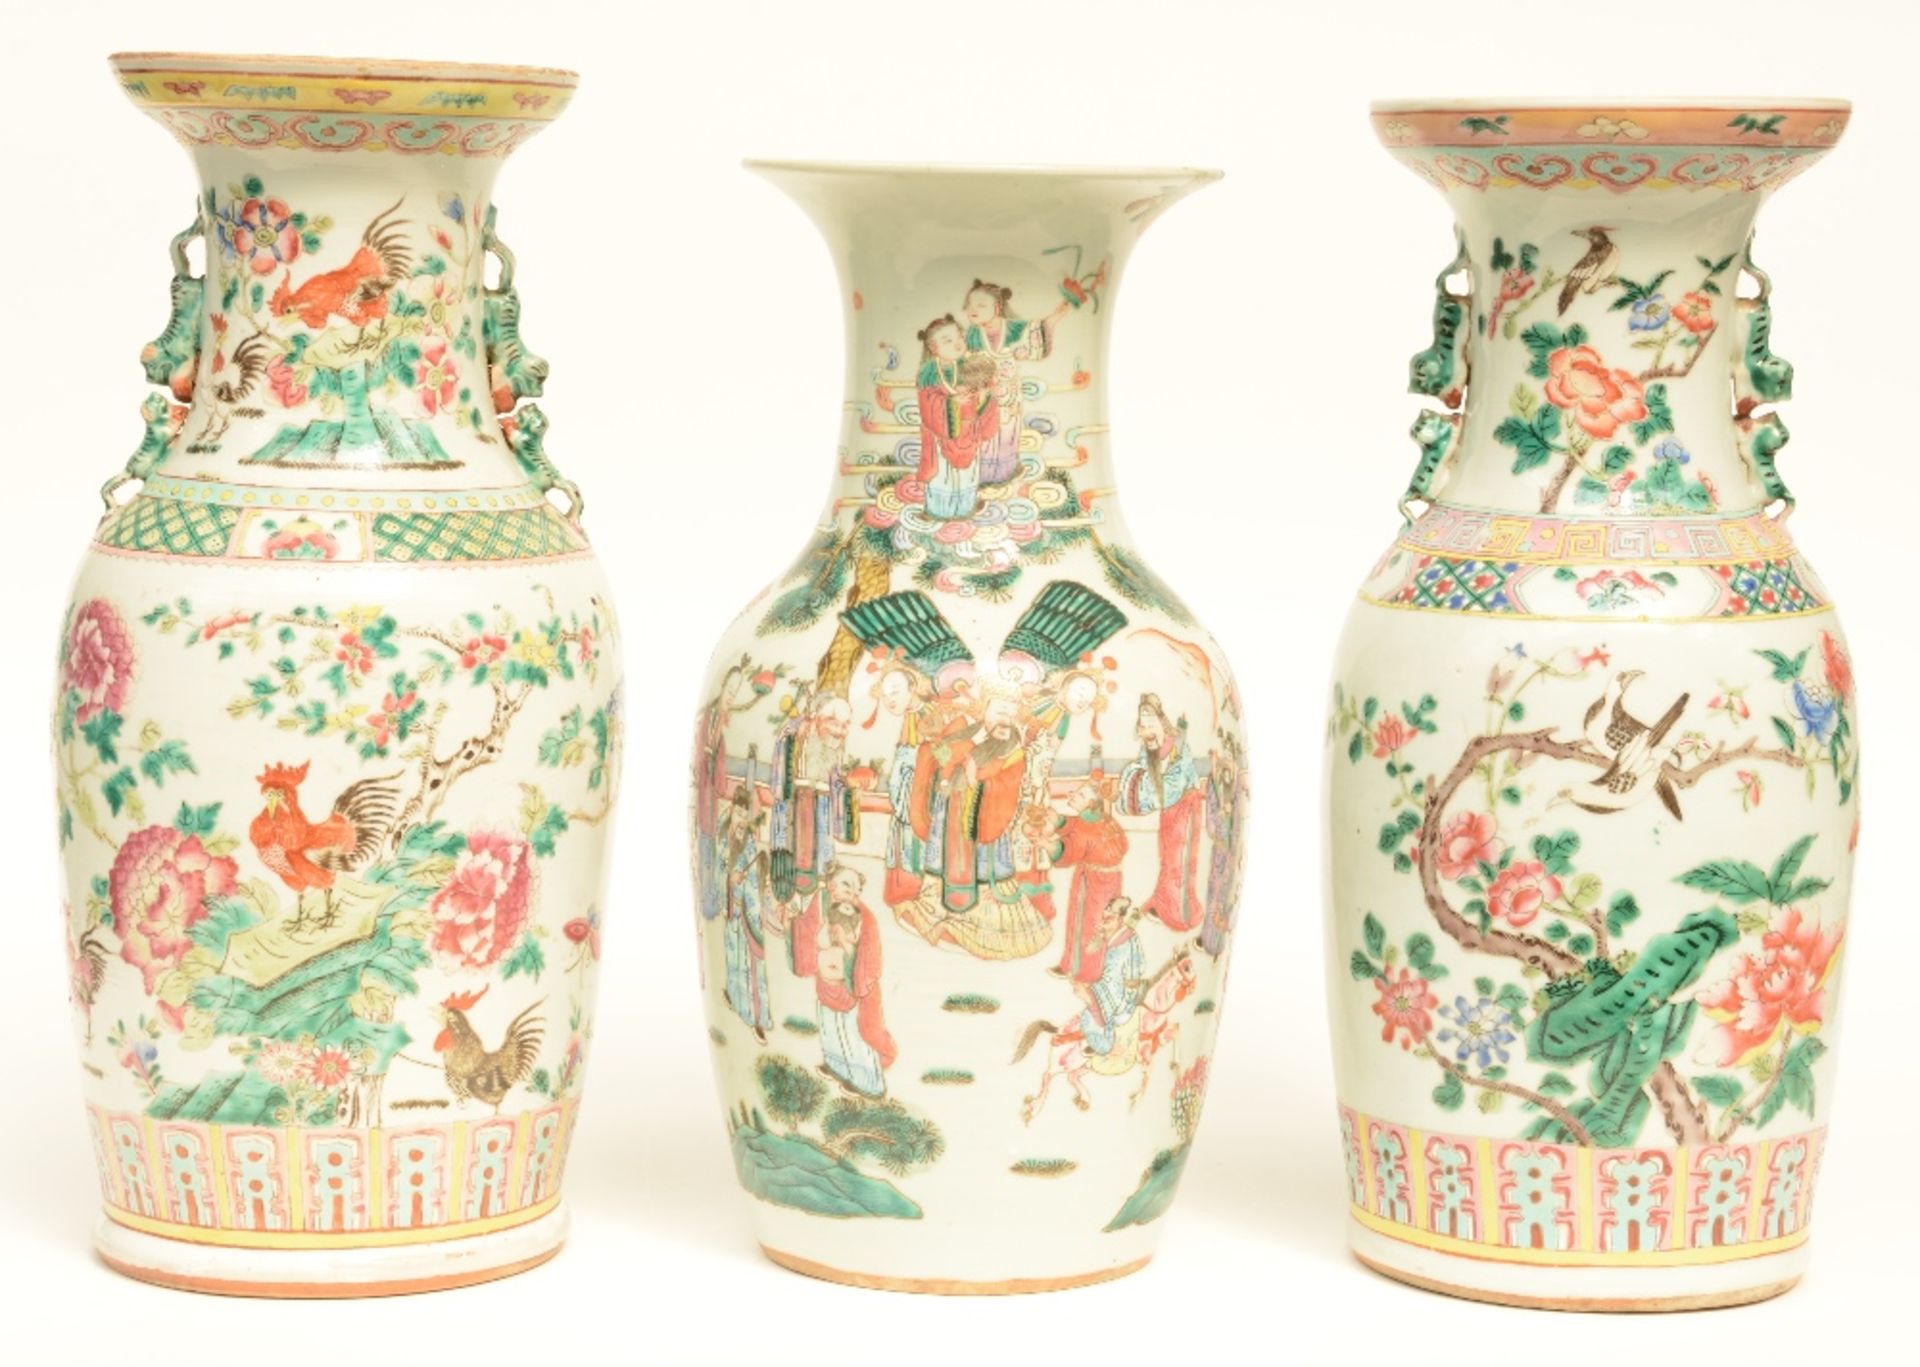 Three Chinese famille rose vases, one painted with the Eight Immortals, two painted with cockerels